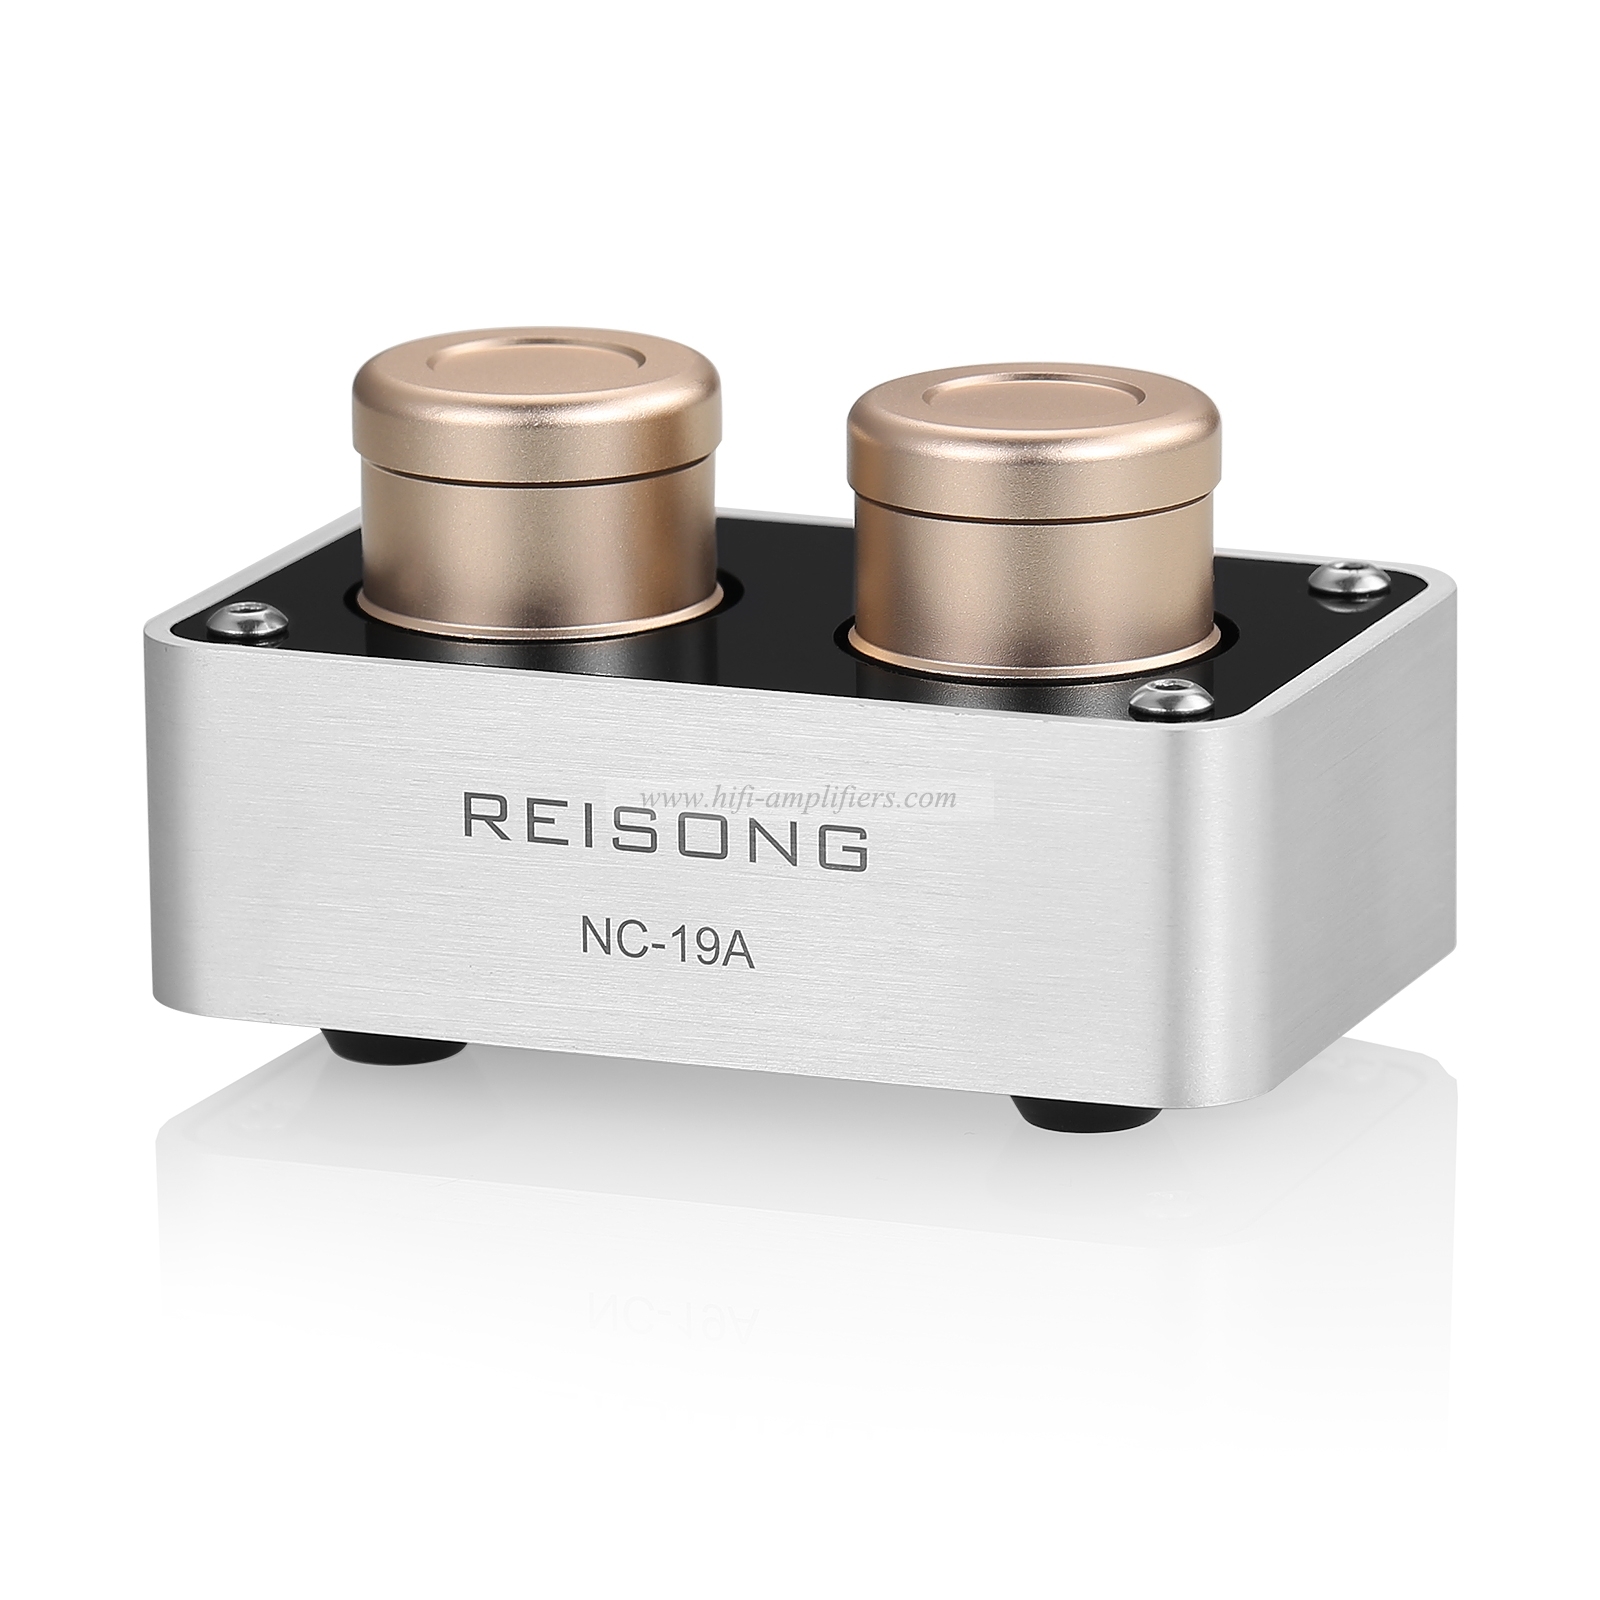 REISONG Boyuu NC-19A 1:2 Audio Signal Step-up Transformer Preamp Passive Adapter